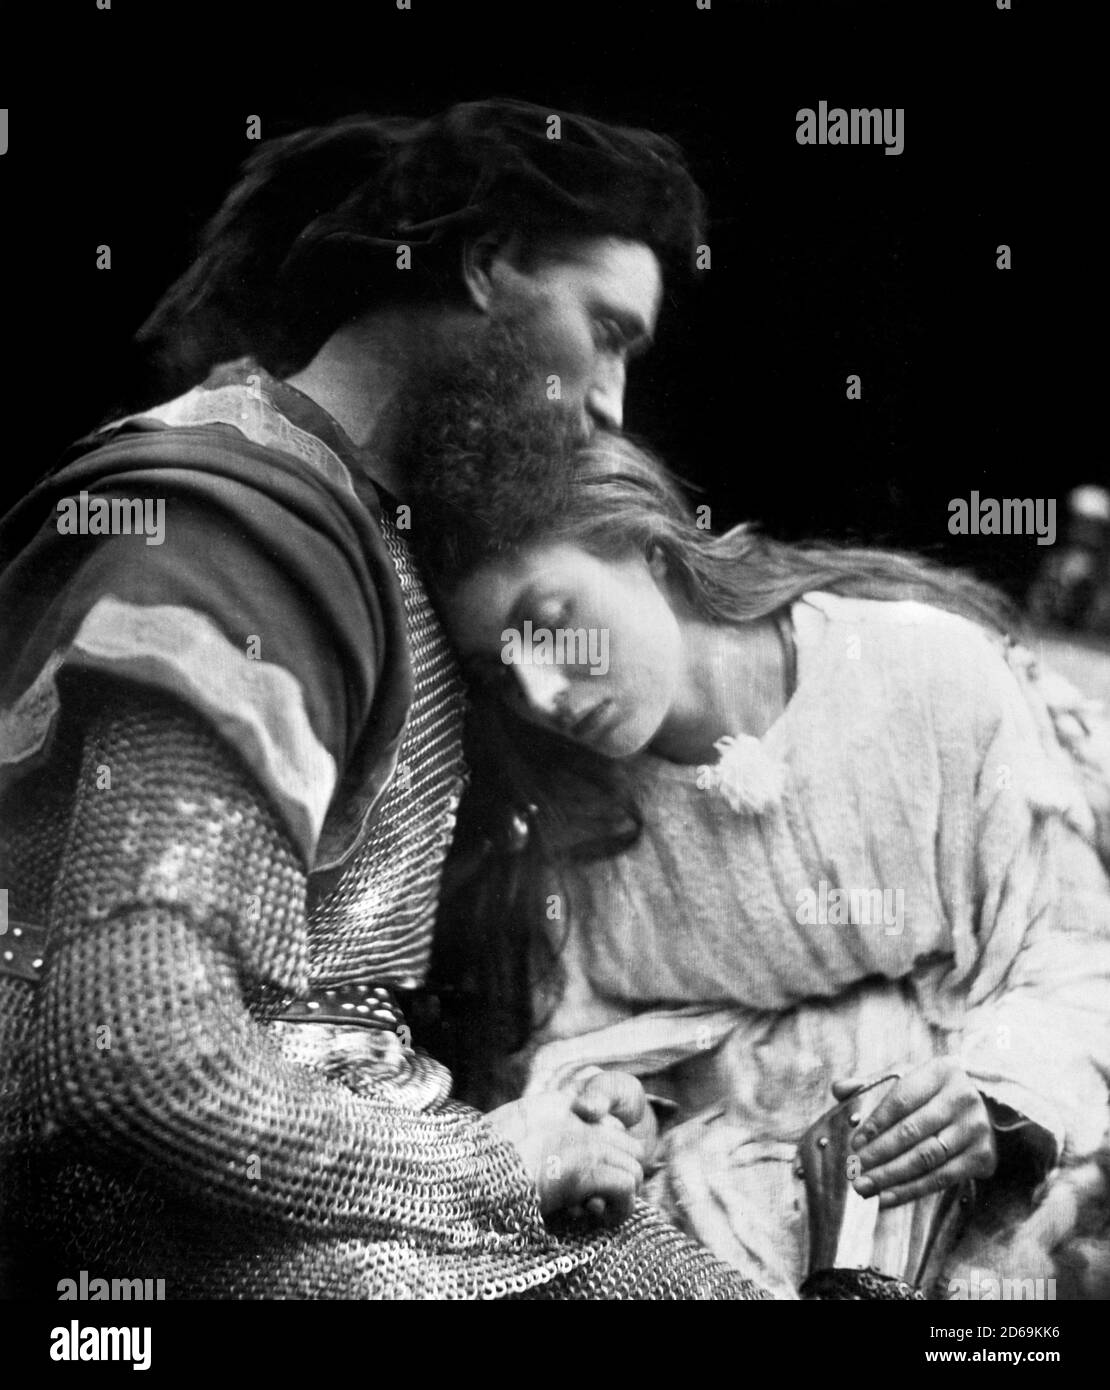 Sir Lancelot. Photograph entitled “The Parting of Sir Lancelot and Queen Guinevere' by Julia Margaret Cameron (1815-1879), 1874 Stock Photo